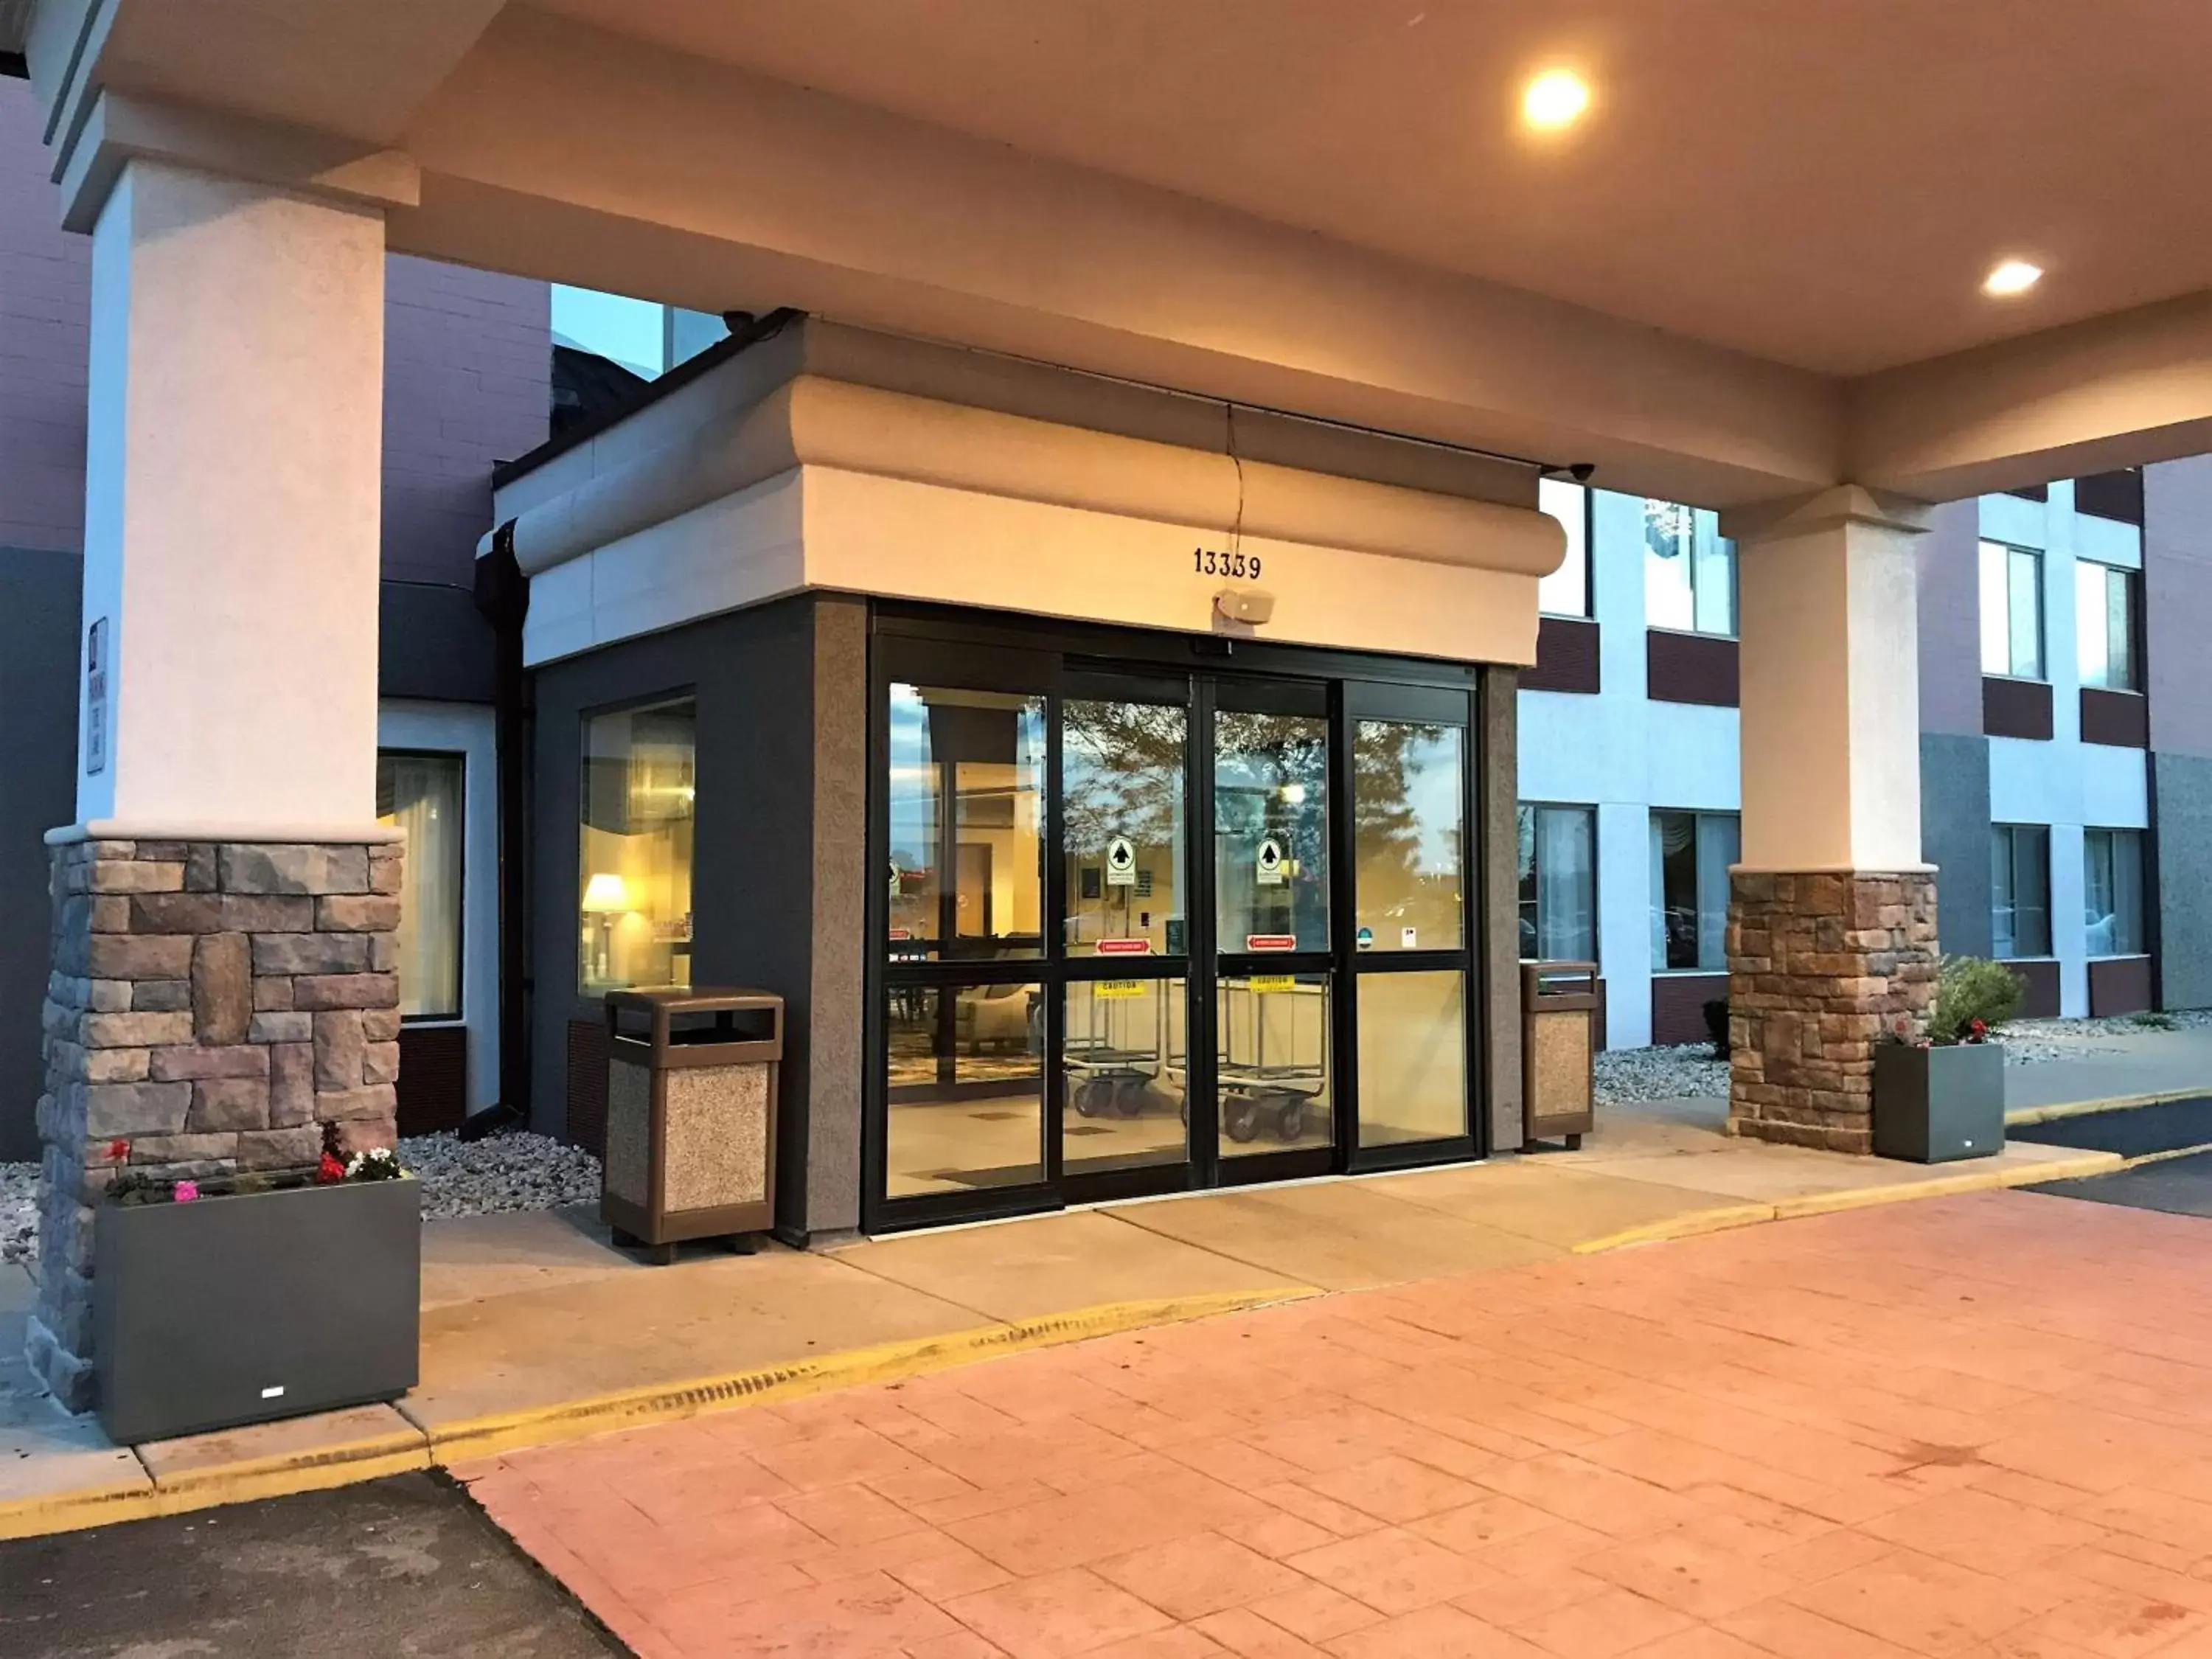 Property building in Country Inn & Suites by Radisson, Mt. Pleasant-Racine West, WI